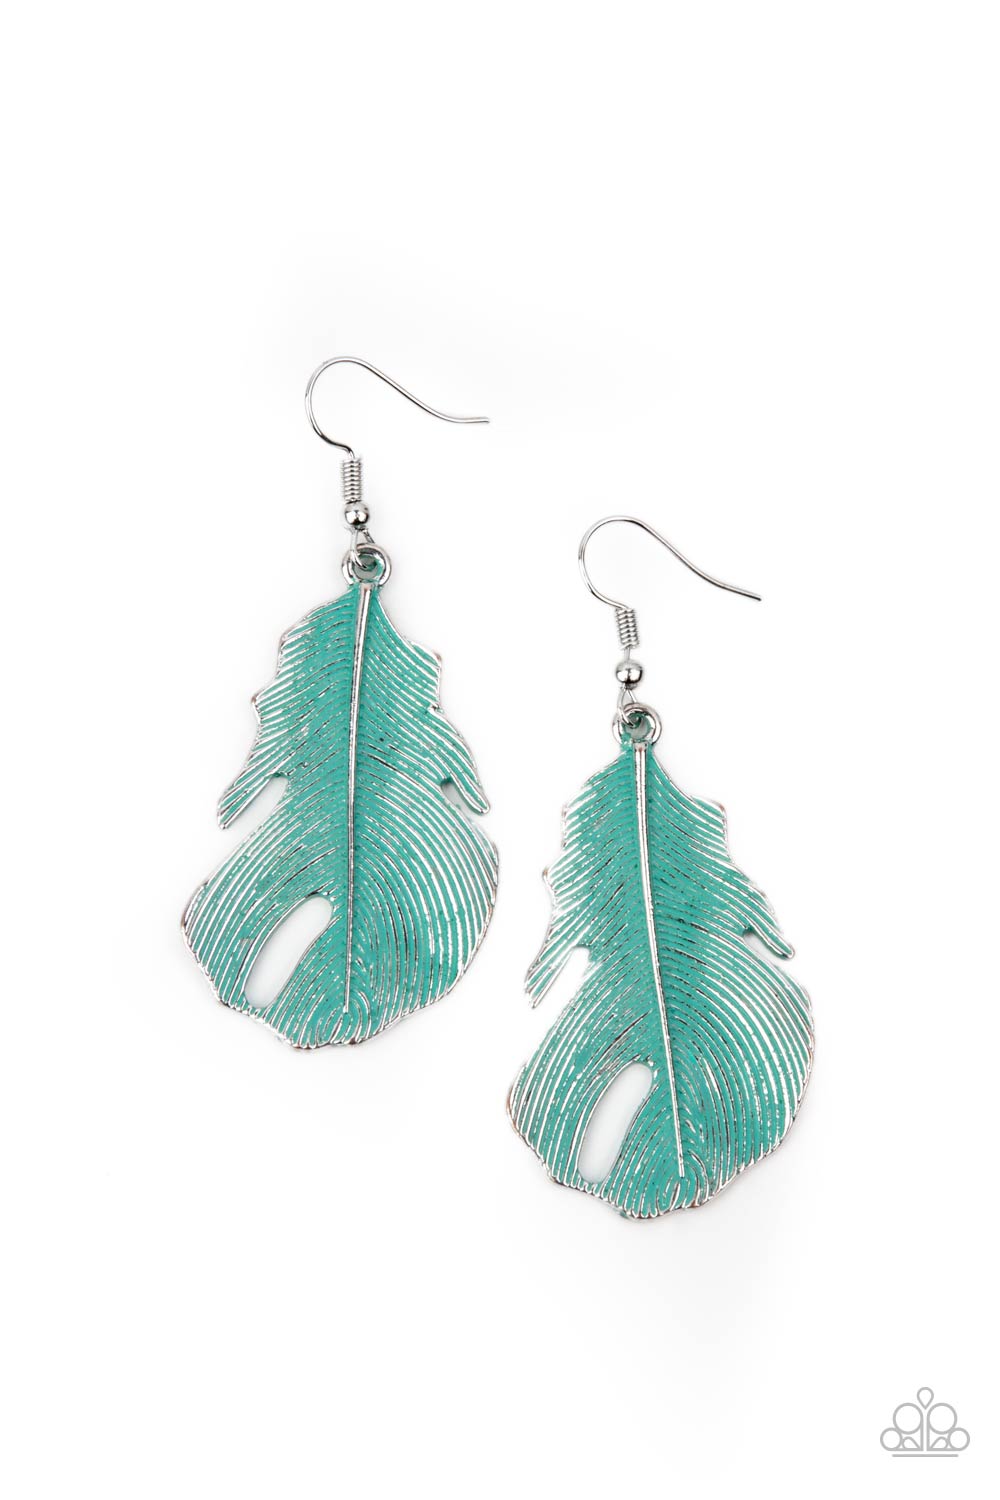 Paparazzi Heads QUILL Roll - Blue Earrings - A Finishing Touch Jewelry